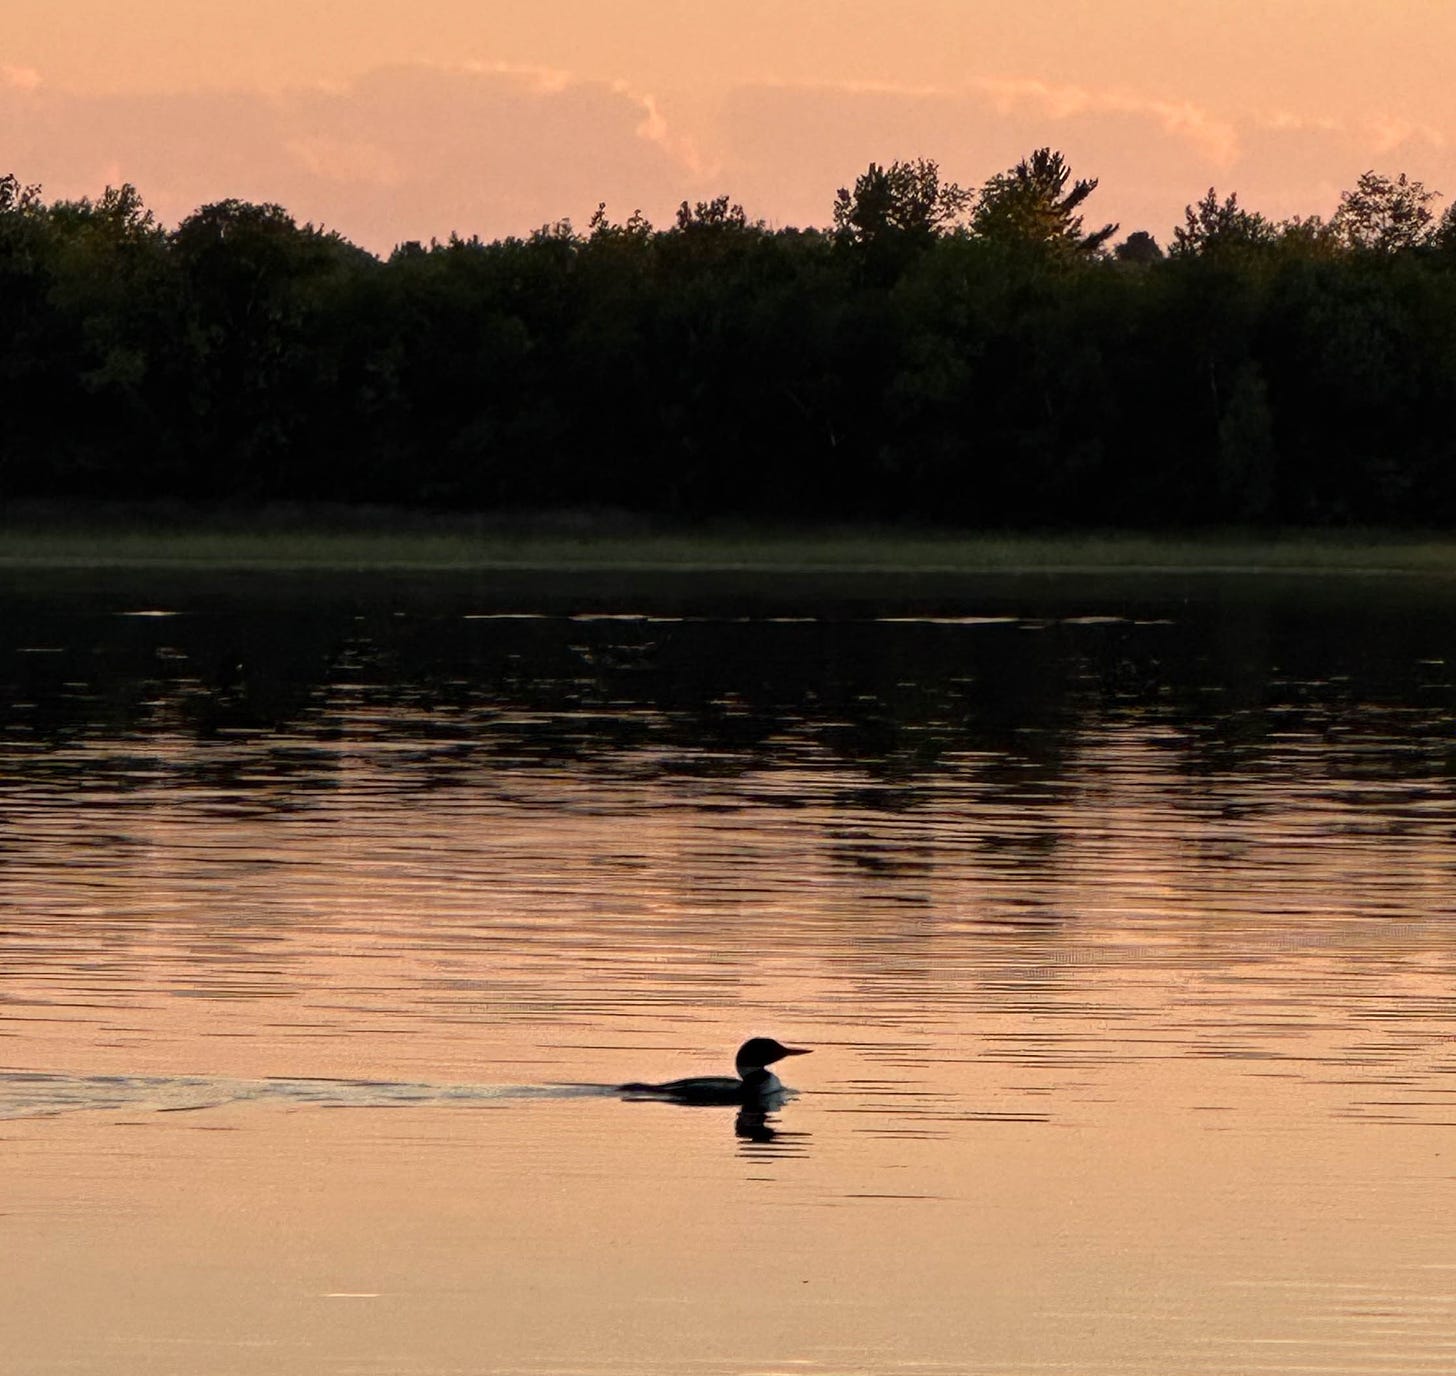 Silhouette of loon with reflection on lake at sunset.